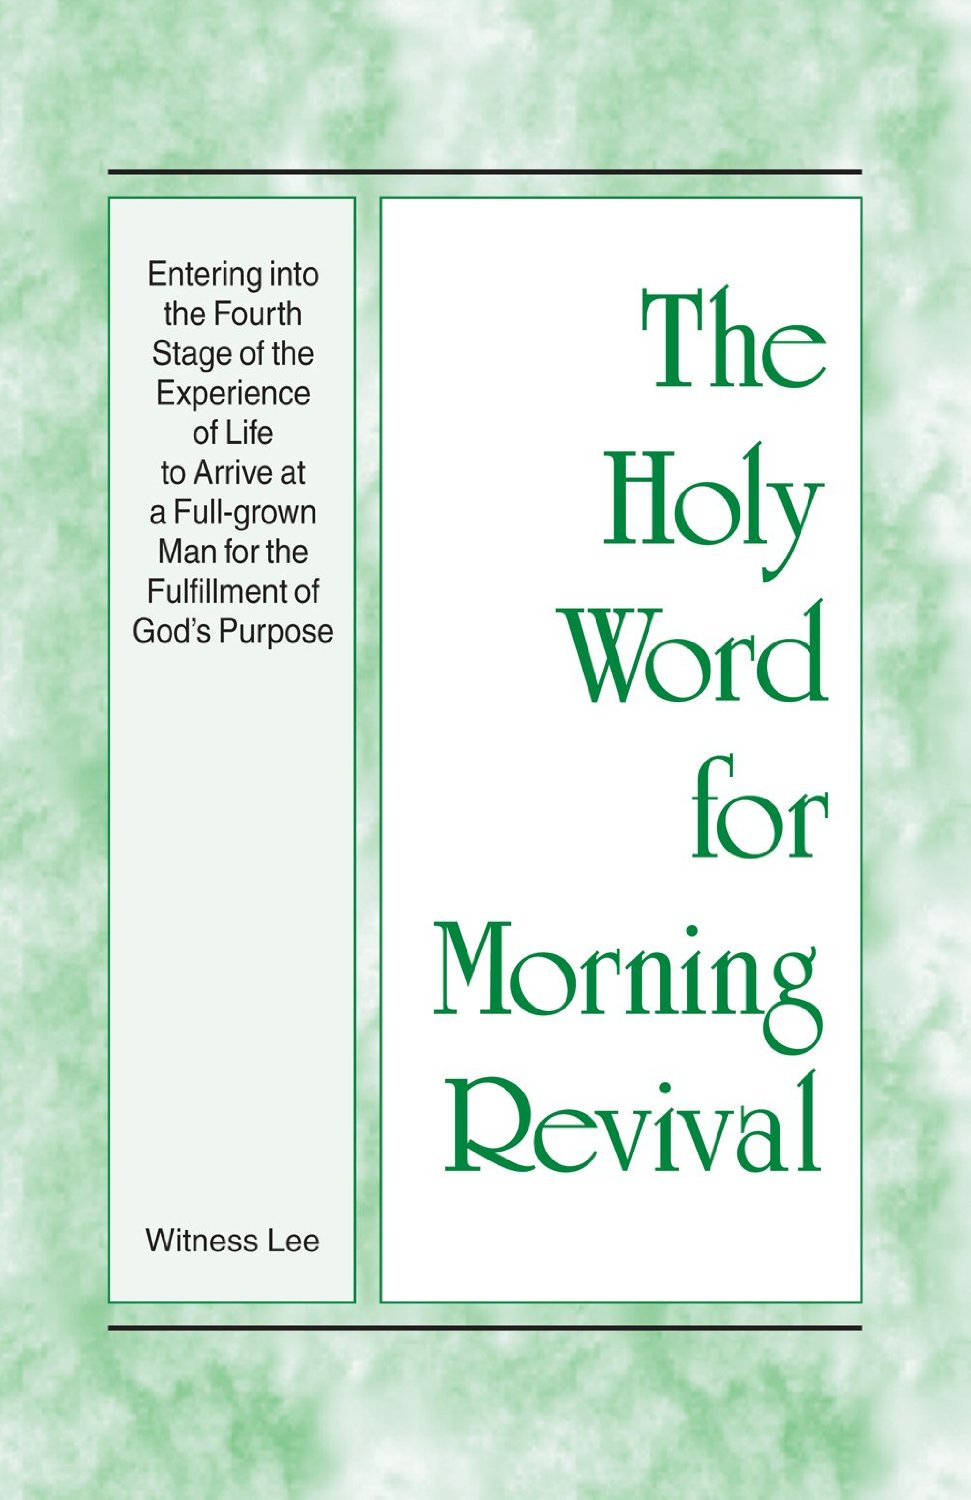 The Holy Word for Morning Revival - Entering into the Fourth Stage of the Experience of Life to Arrive at a Full-grown Man for the Fulfillment of God's Purpose 